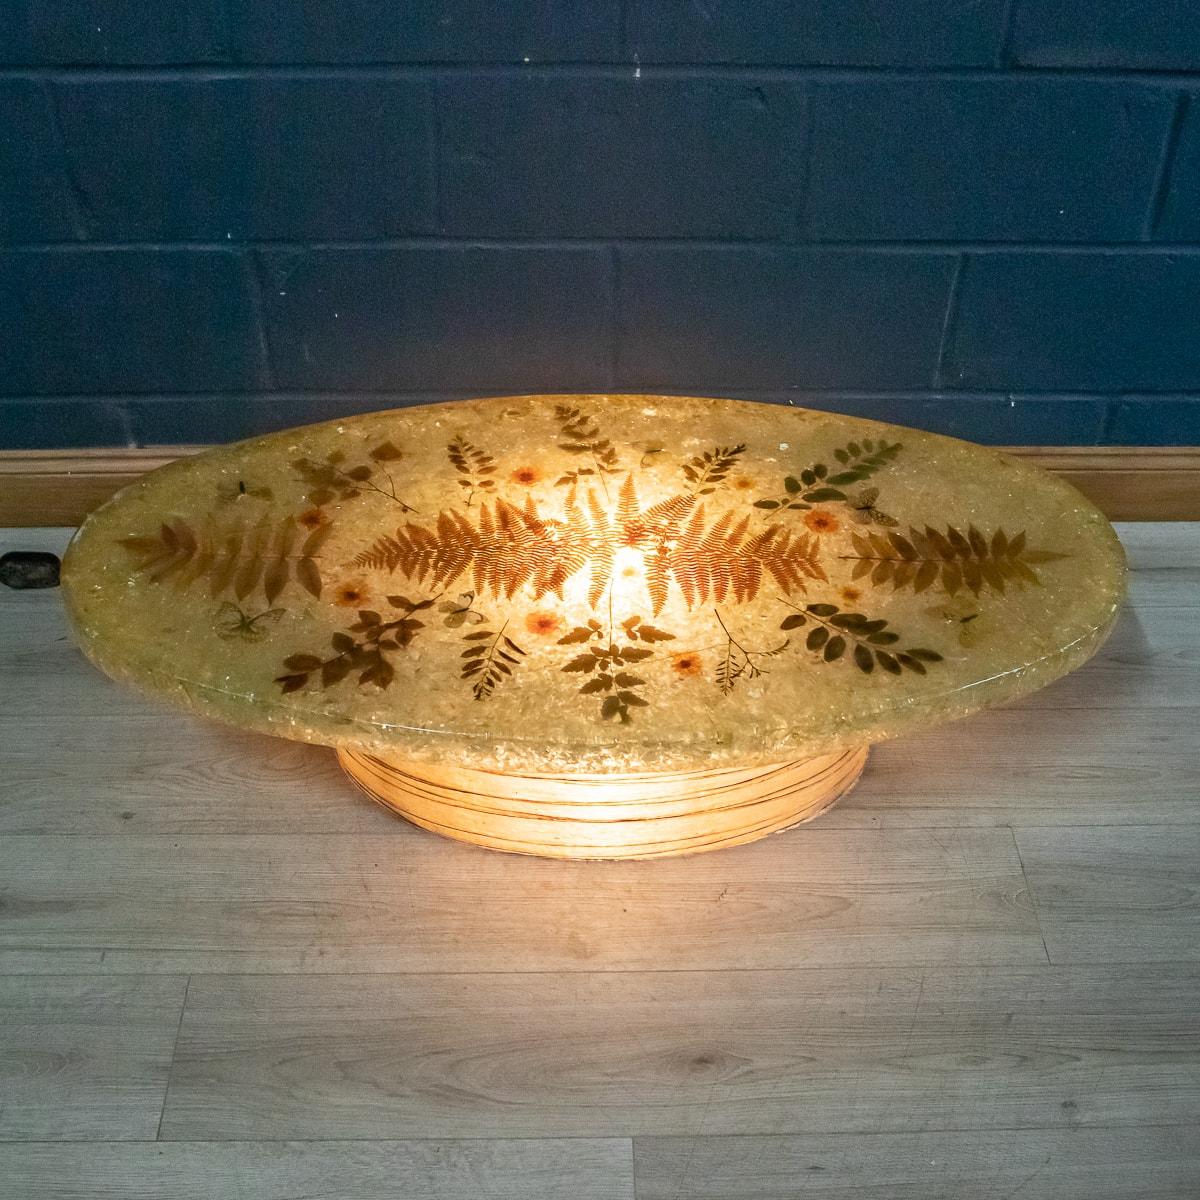 A beautiful illuminating “Accolay“ coffee table or side table made in France in the 1960s. The table top is entirely made of resin with inclusions of natural elements like leaves, flowers and butterflies, typical of the Accolay workmanship. It